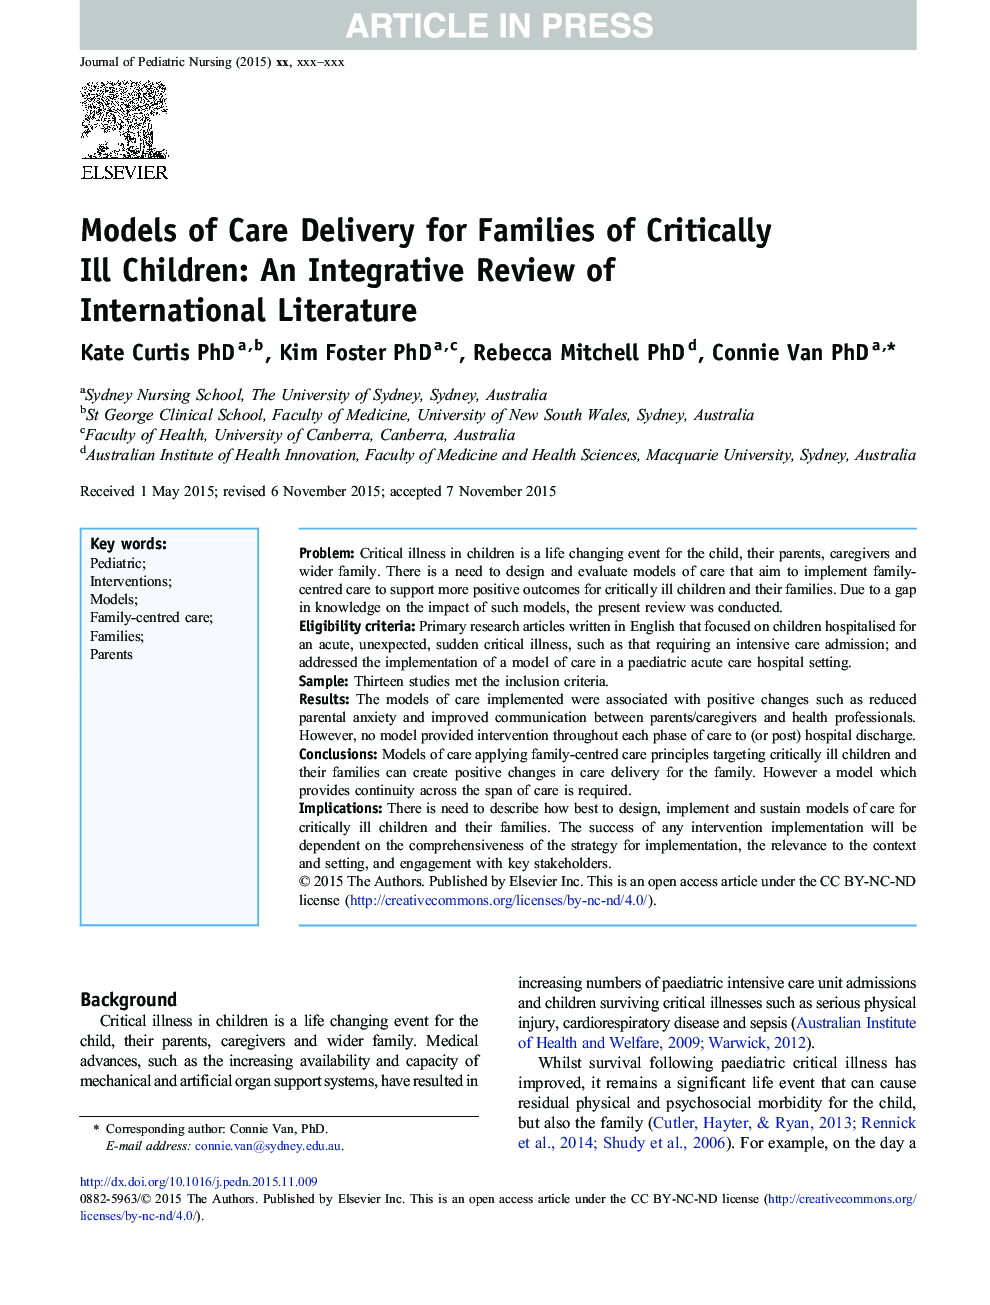 Models of Care Delivery for Families of Critically Ill Children: An Integrative Review of International Literature